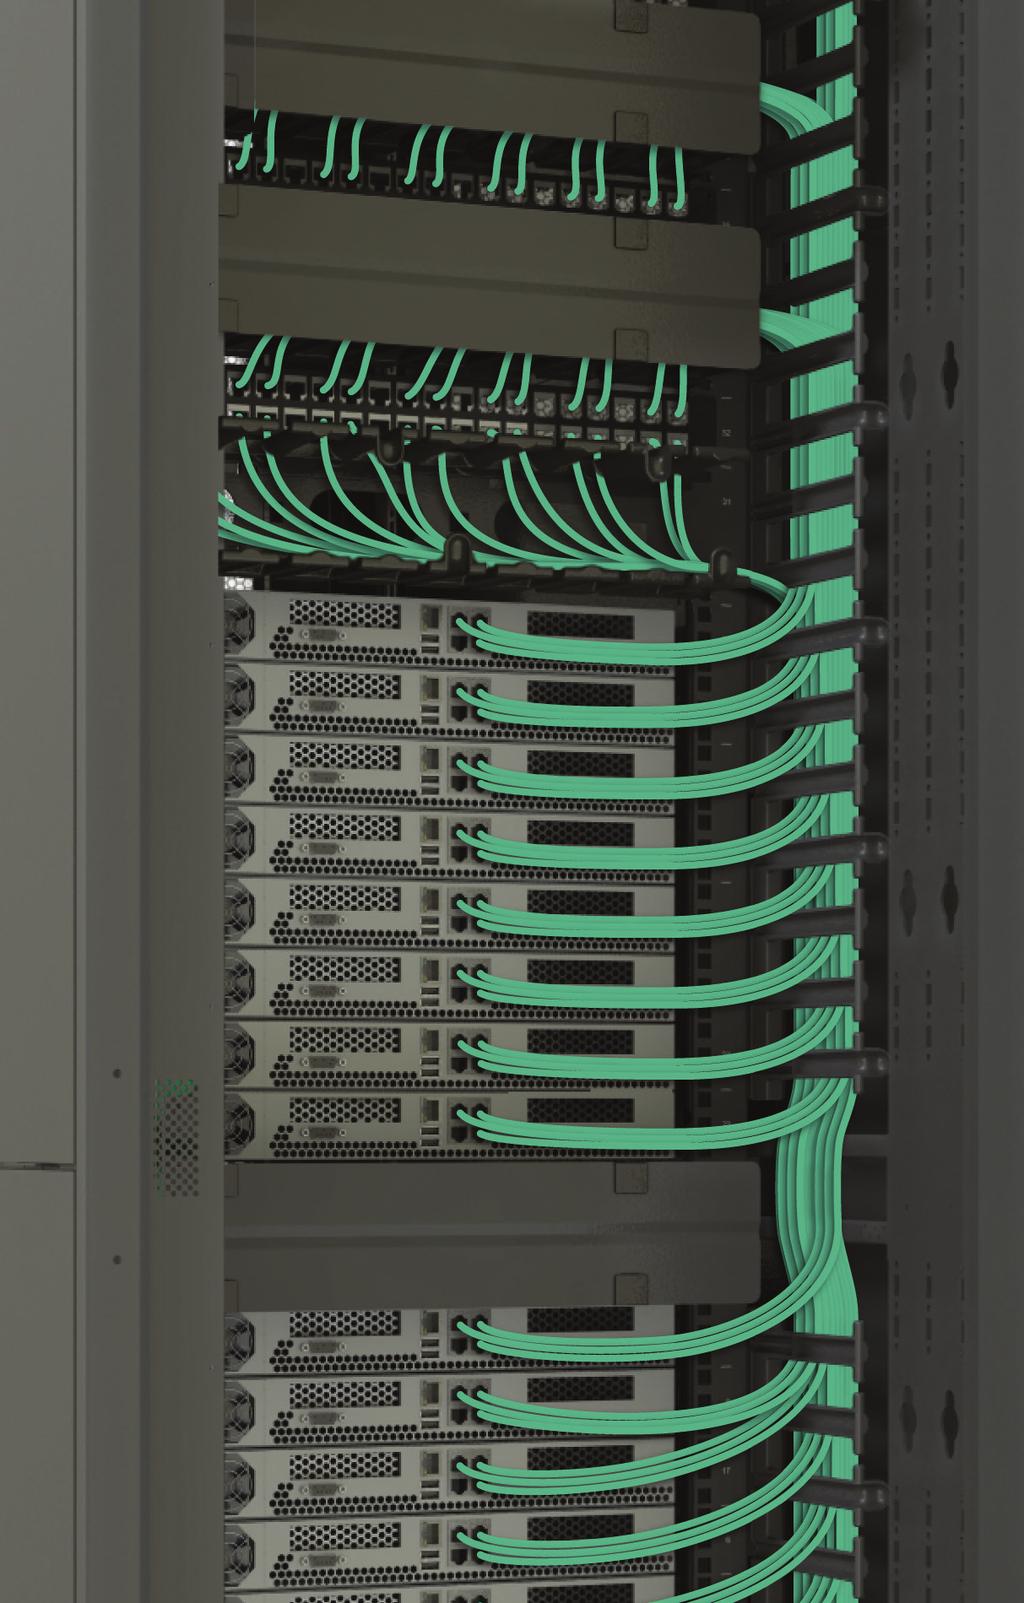 4. Rack-mounted components blocked by improperly routed cables. Access to servers and other network components housed within an enclosure is critical.